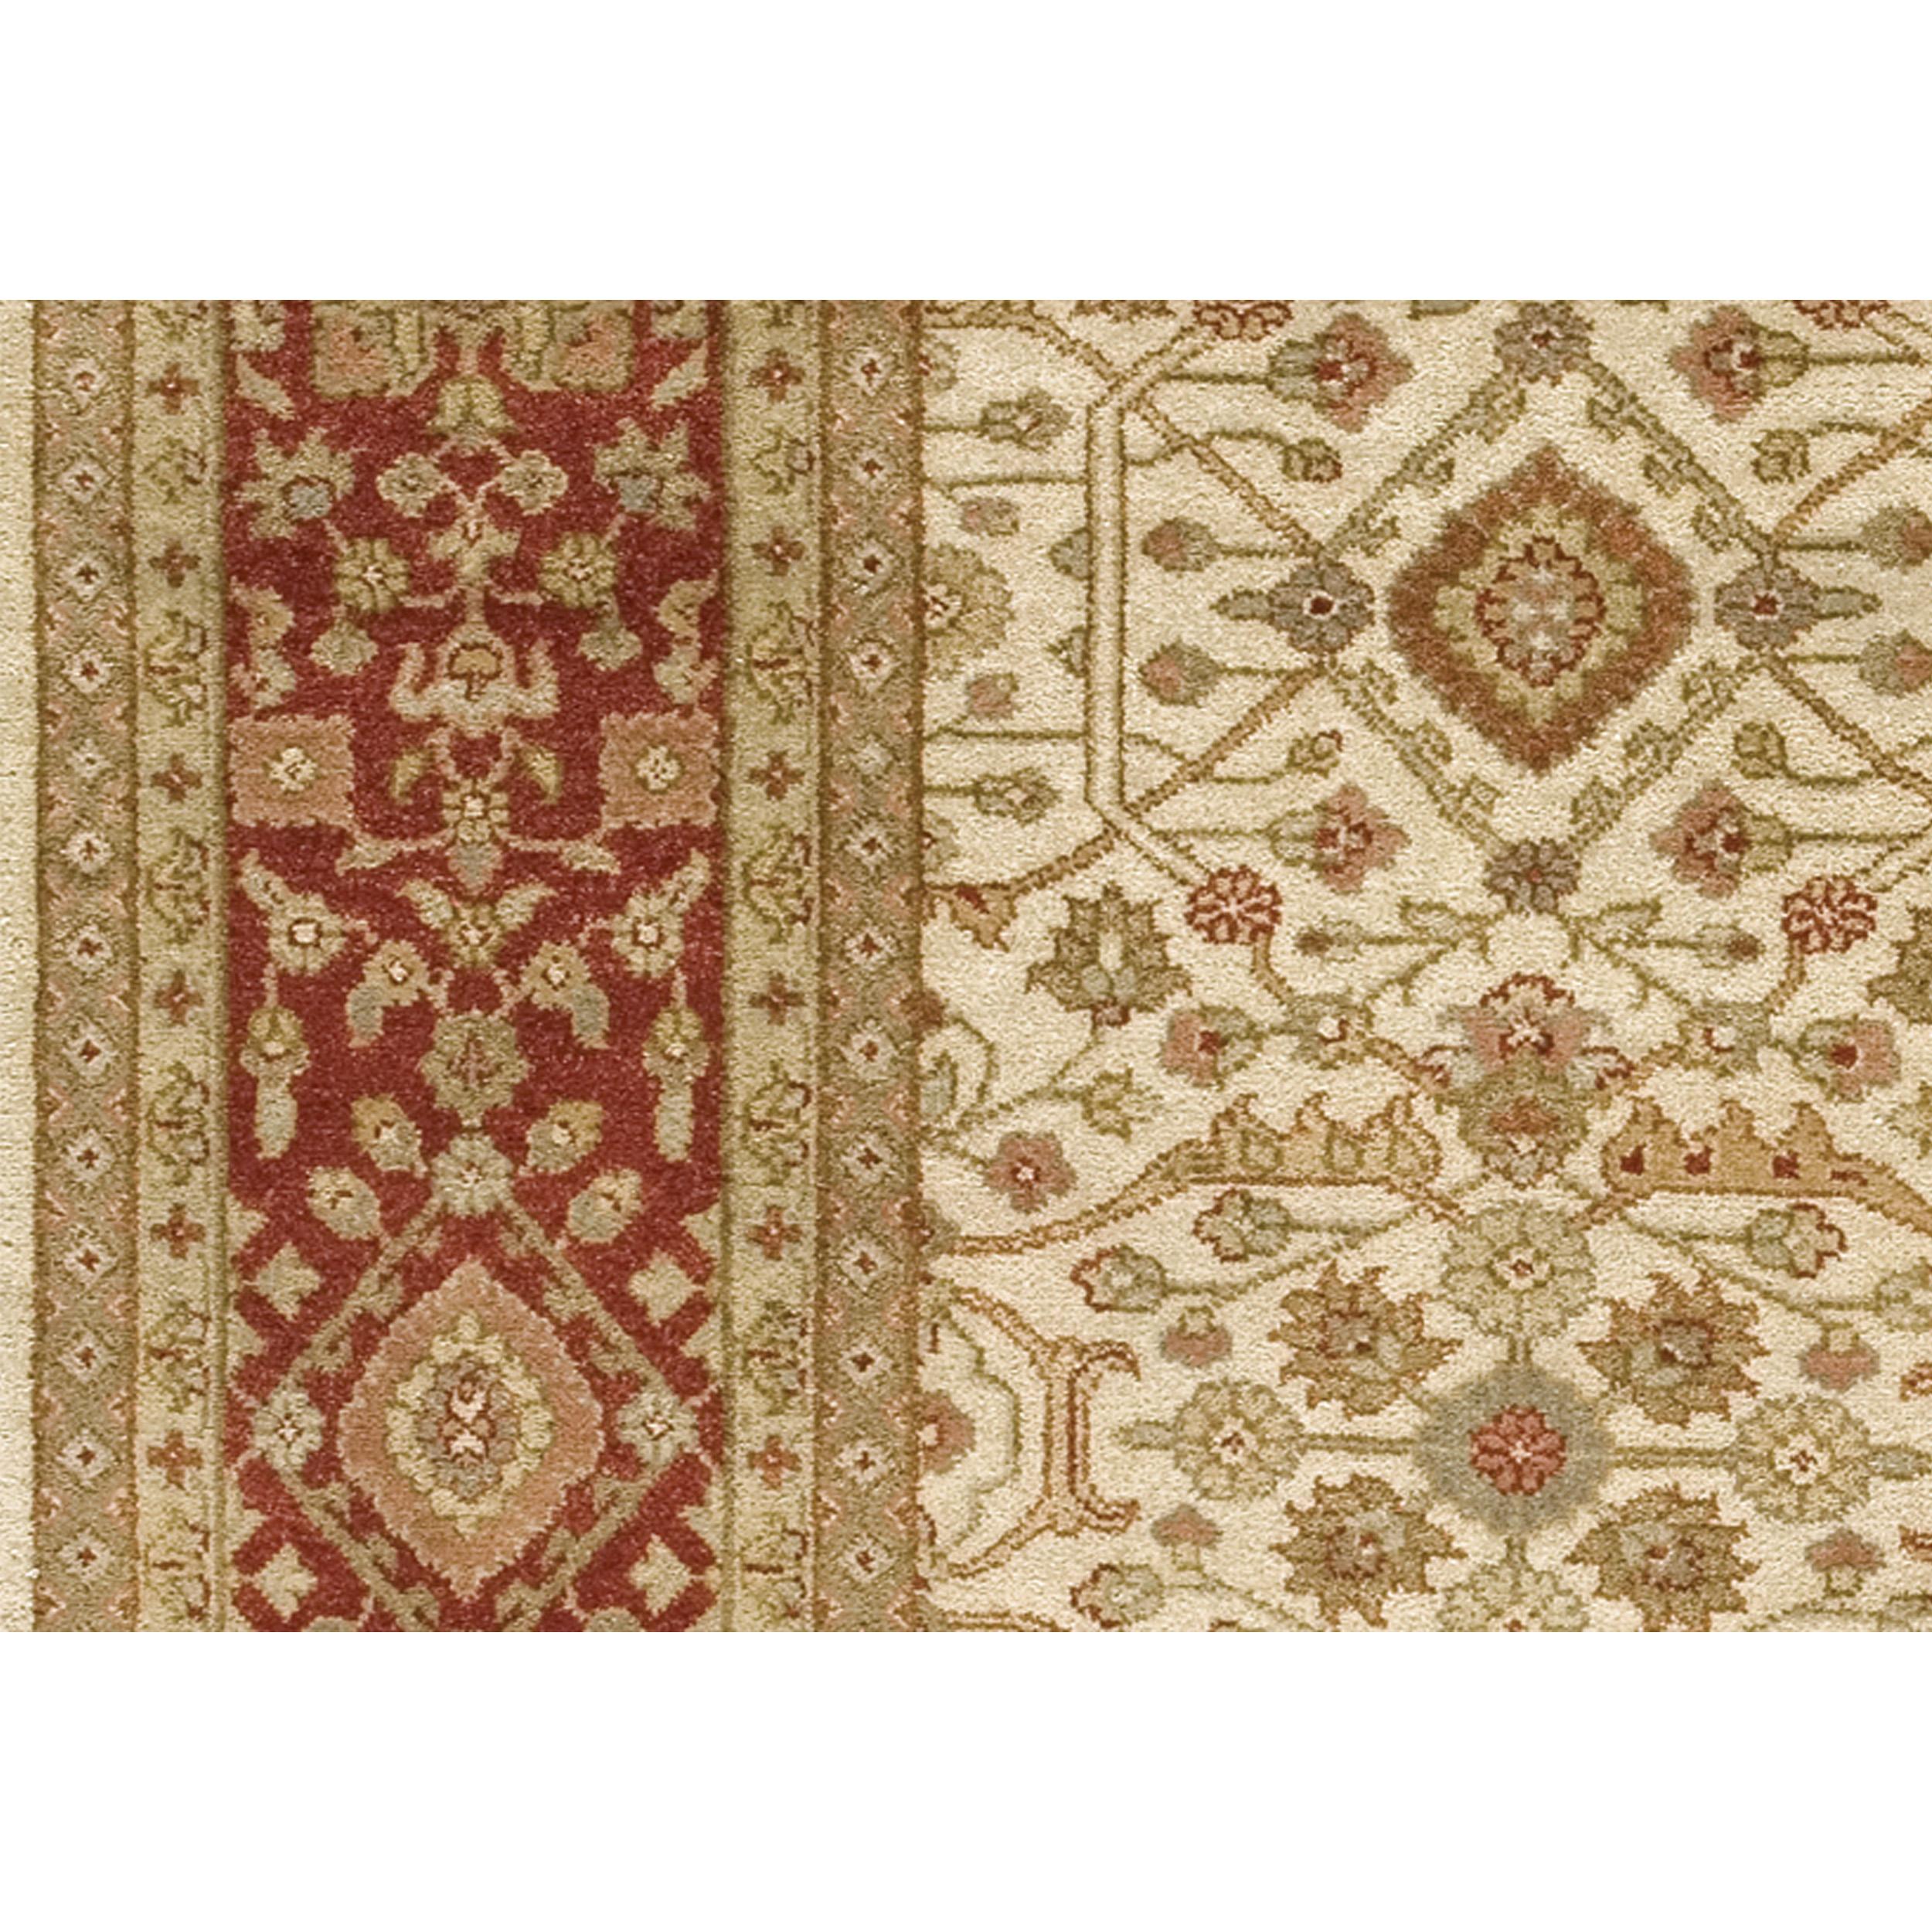 Luxury Traditional Hand-Knotted Ziegler Ivory & Brick 12x22 Rug In New Condition For Sale In Secaucus, NJ